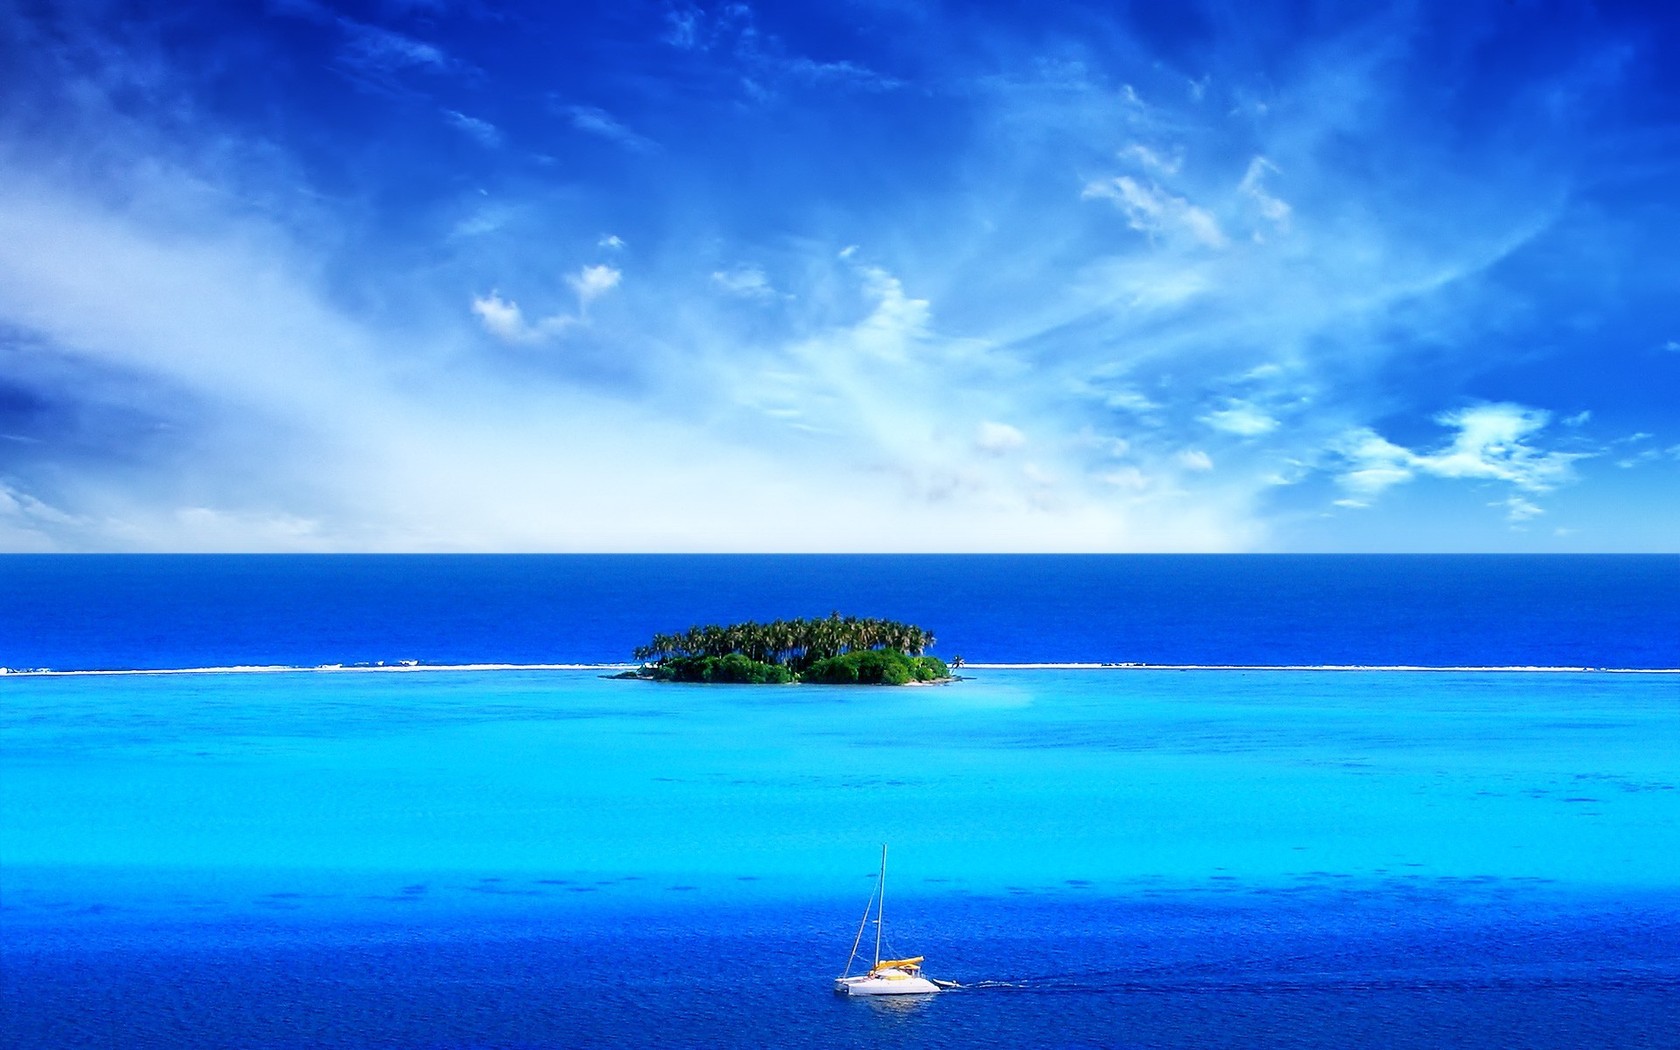 Download Sailing around the tropical island wallpaper 1680x1050